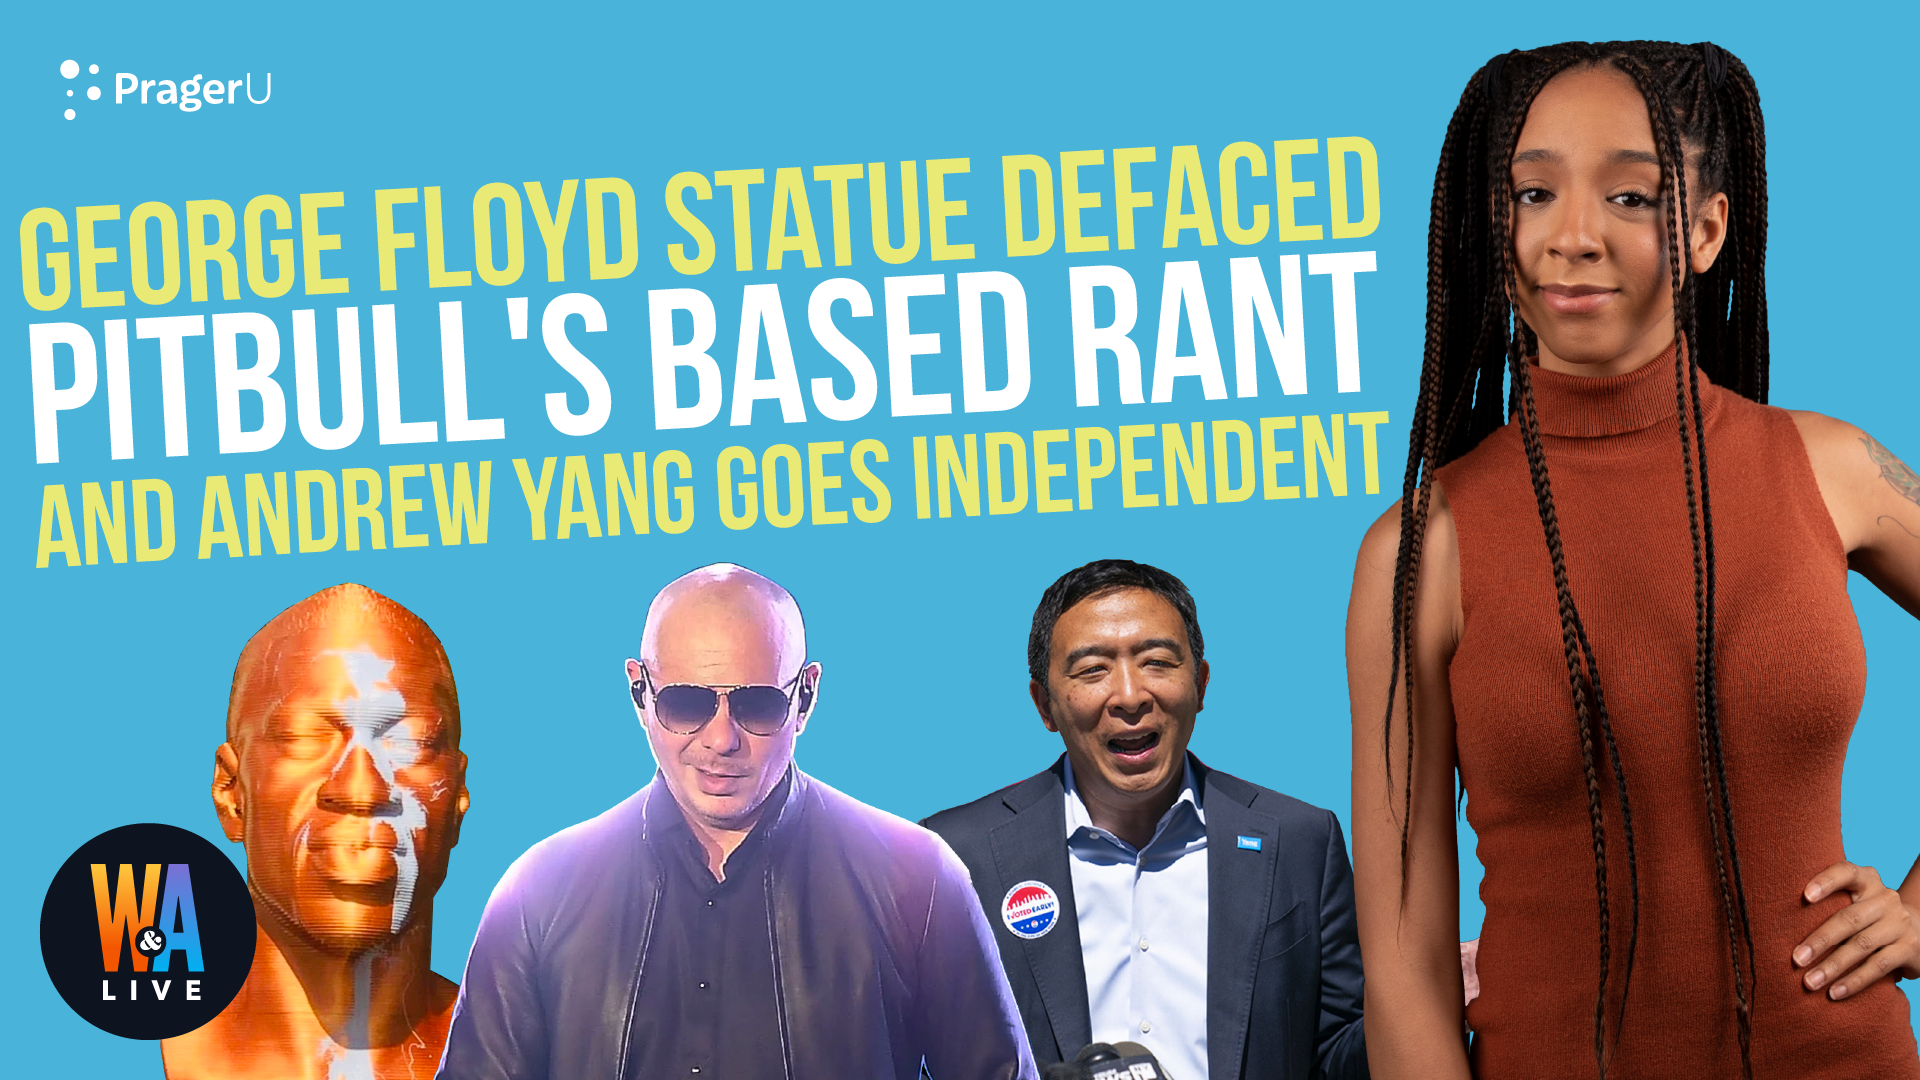 George Floyd Statue Defaced, Pitbull’s Based Rant, & Andrew Yang Independent?: 10/4/2021